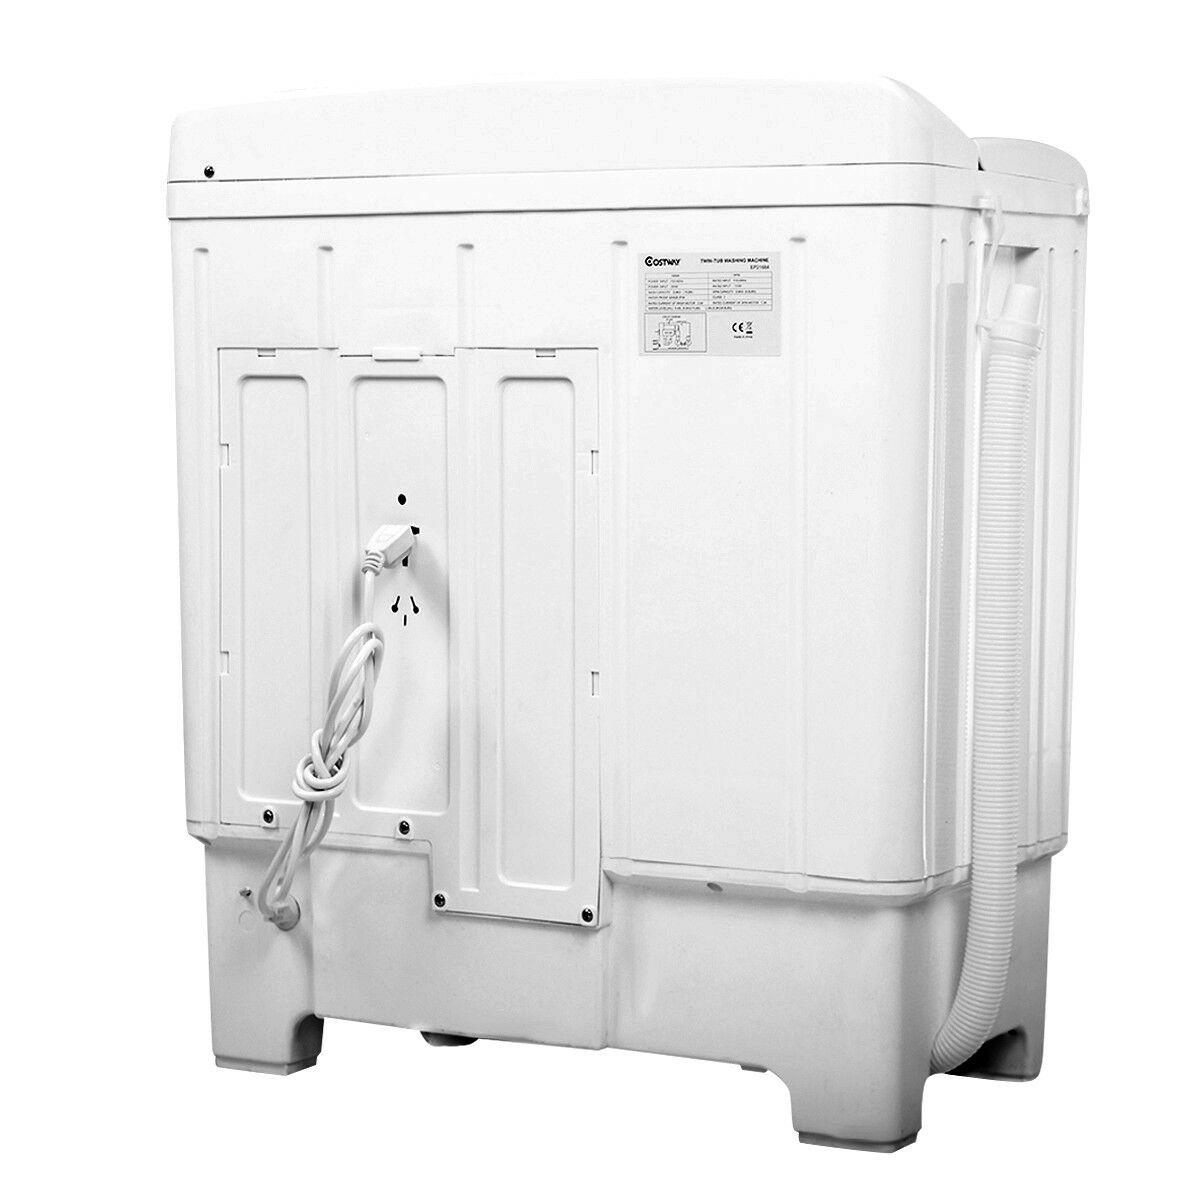 Costway 17.6lb Portable Mini Compact Twin Tub  Washing Machine Washer Spin Dryer - image 4 of 9